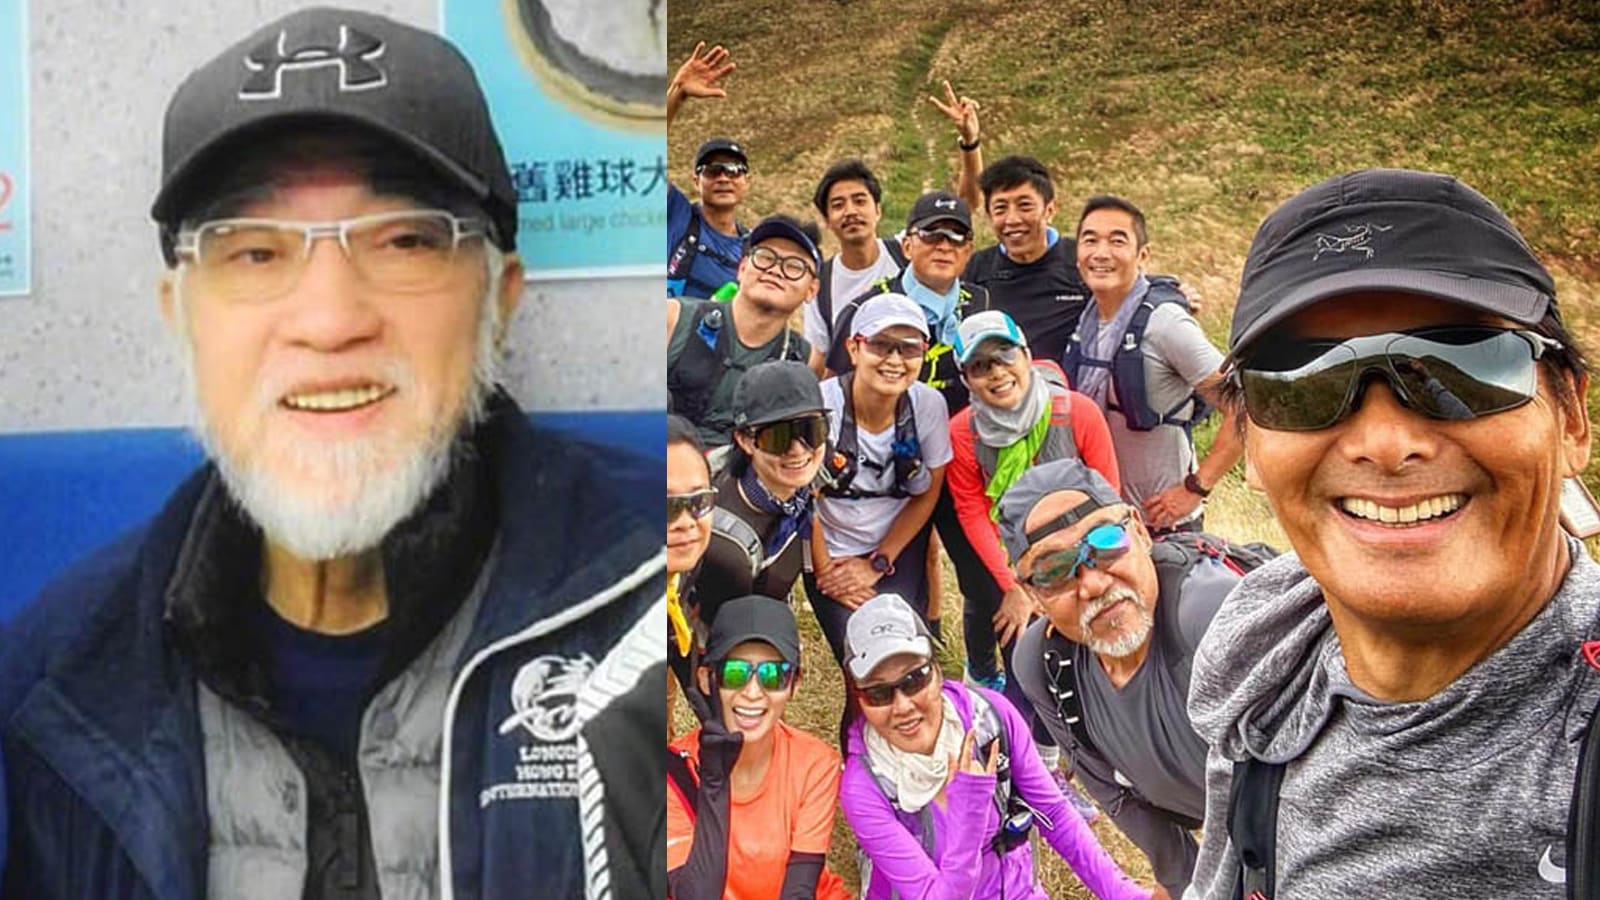 Chow Yun Fat Gives Foot Massages To His Tired Friends On Hikes, Says Veteran HK Actor Lo Hoi Pang